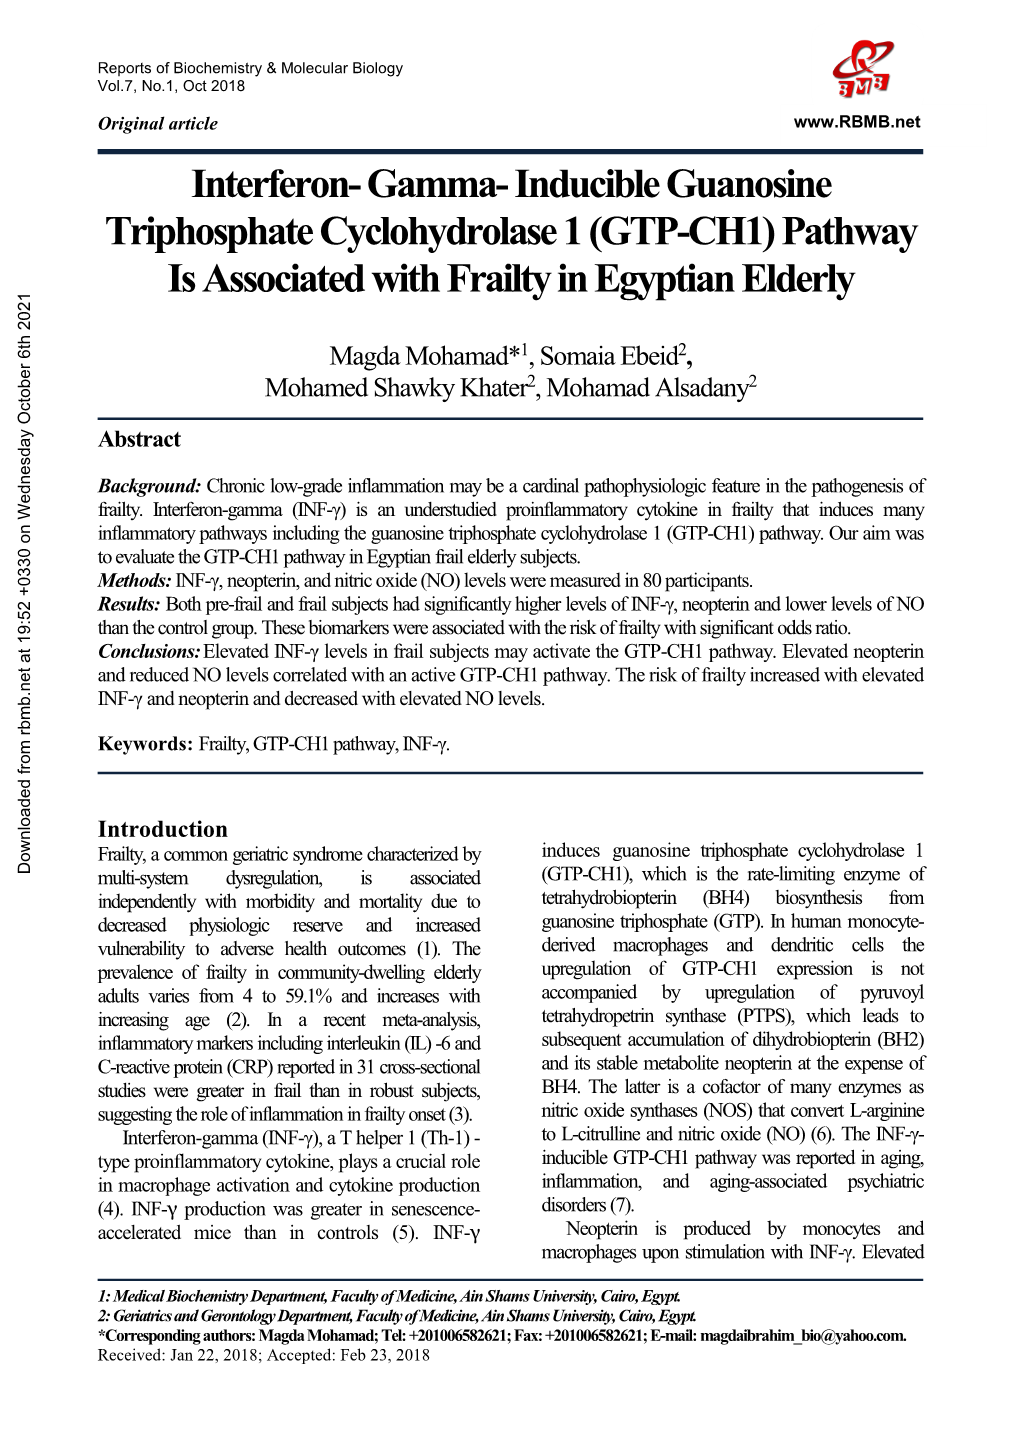 (GTP-CH1) Pathway Is Associated with Frailty in Egyptian Elderly